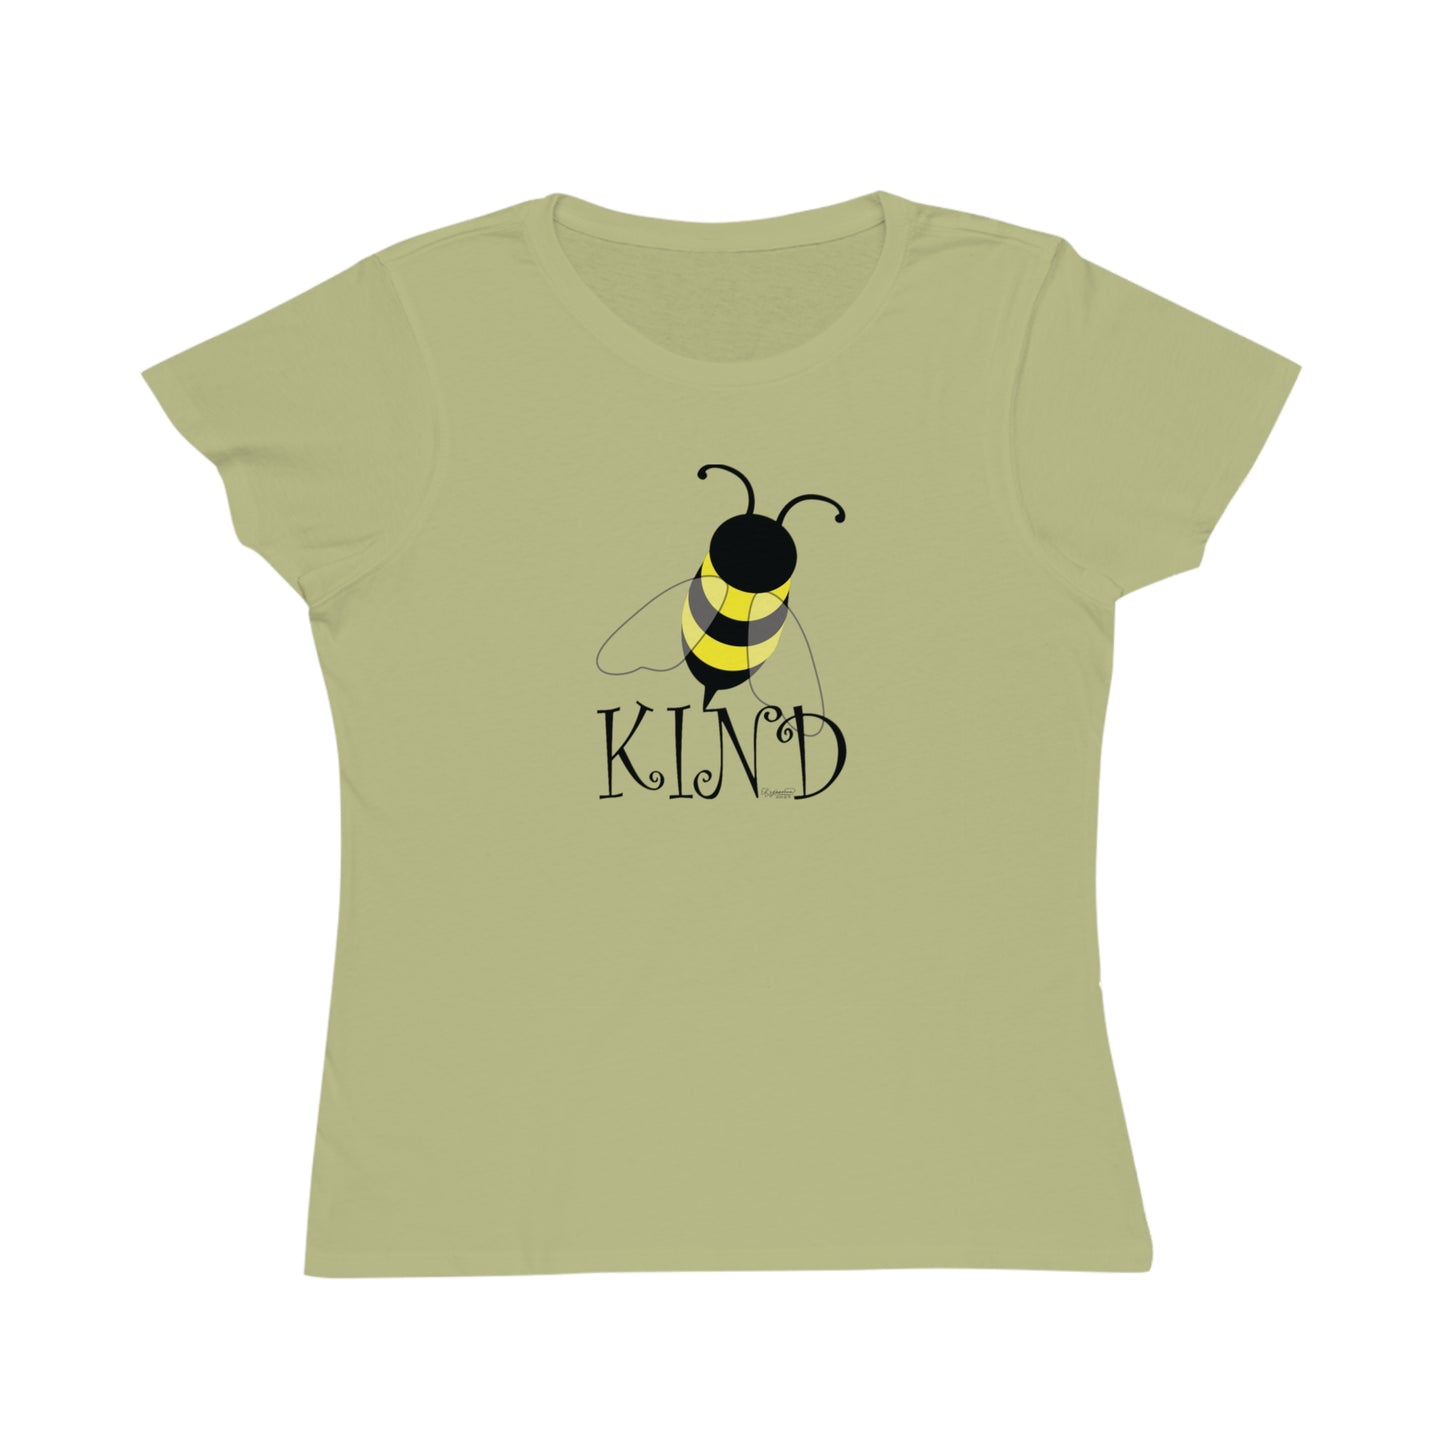 Bee Kind: The Women's Classic Organic Cotton T-Shirt That Inspires Compassion